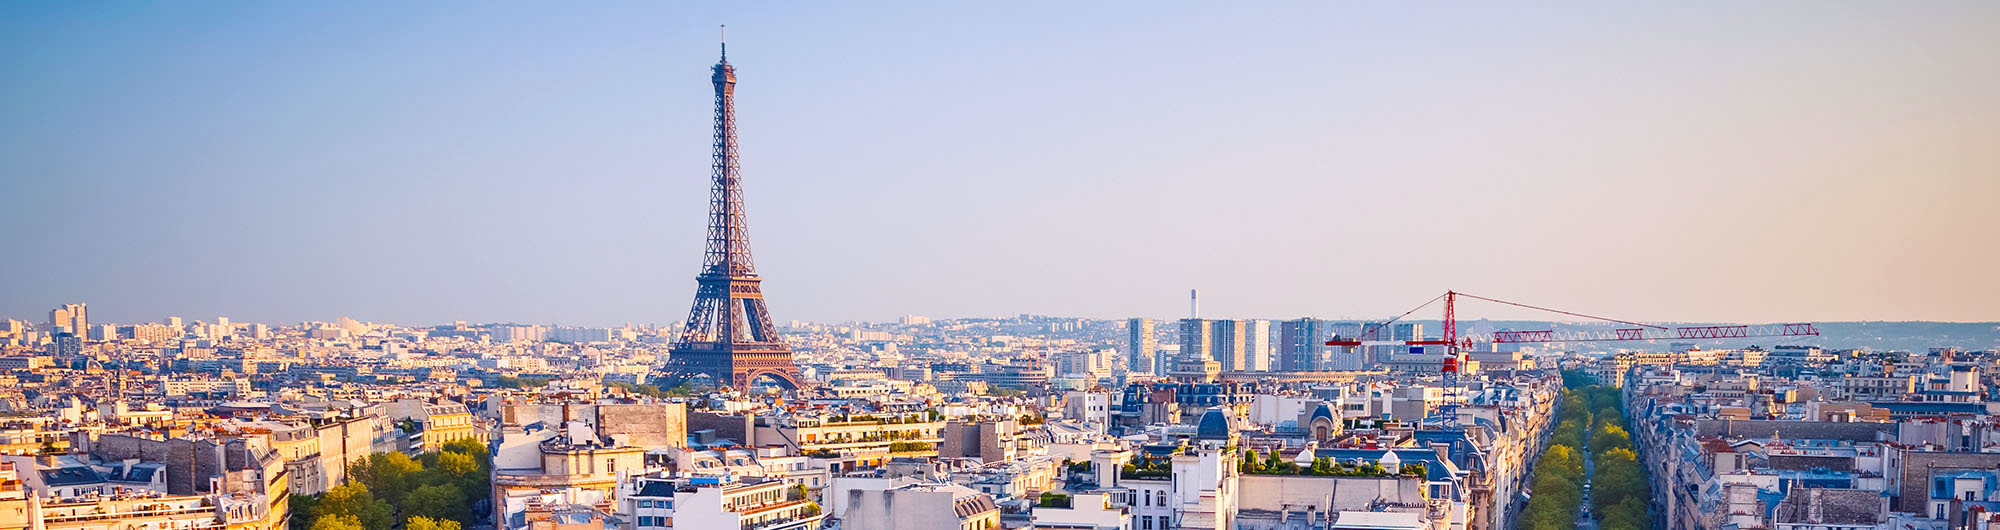 Search and compare cheap flights from Kuwait City to Paris